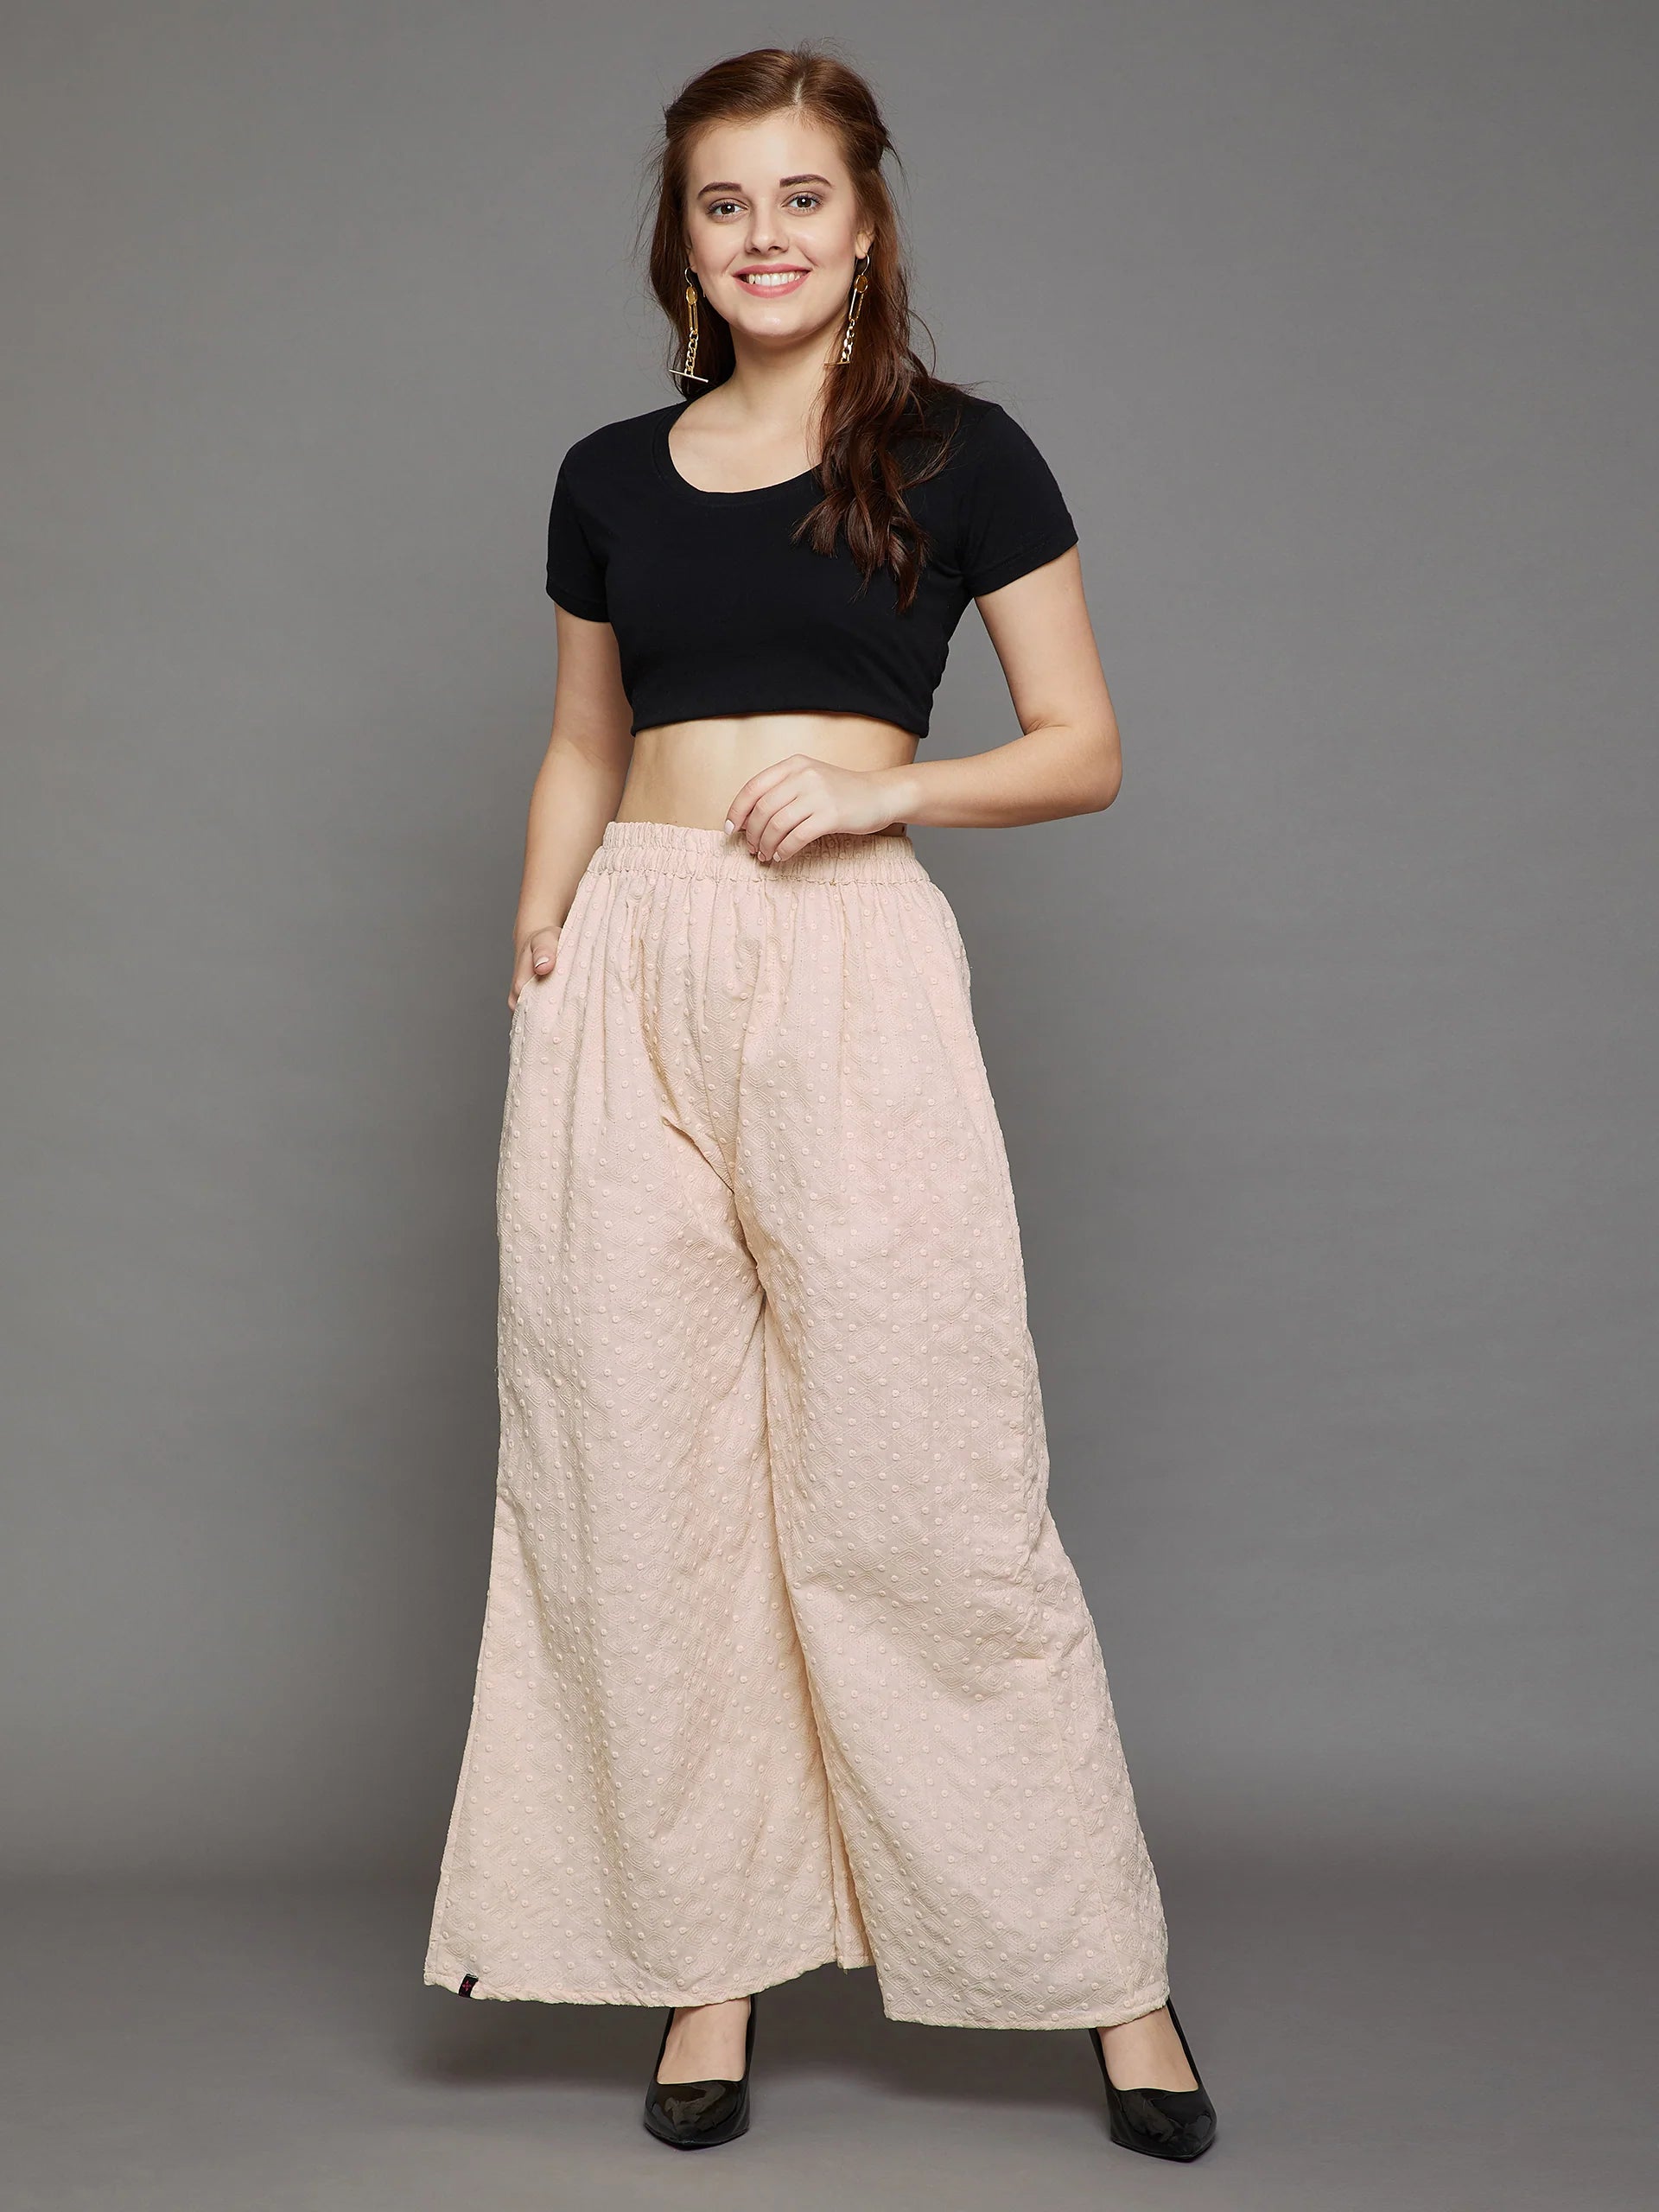 Women's Casual Two-Piece Top and Pant Offer - LivingSocial